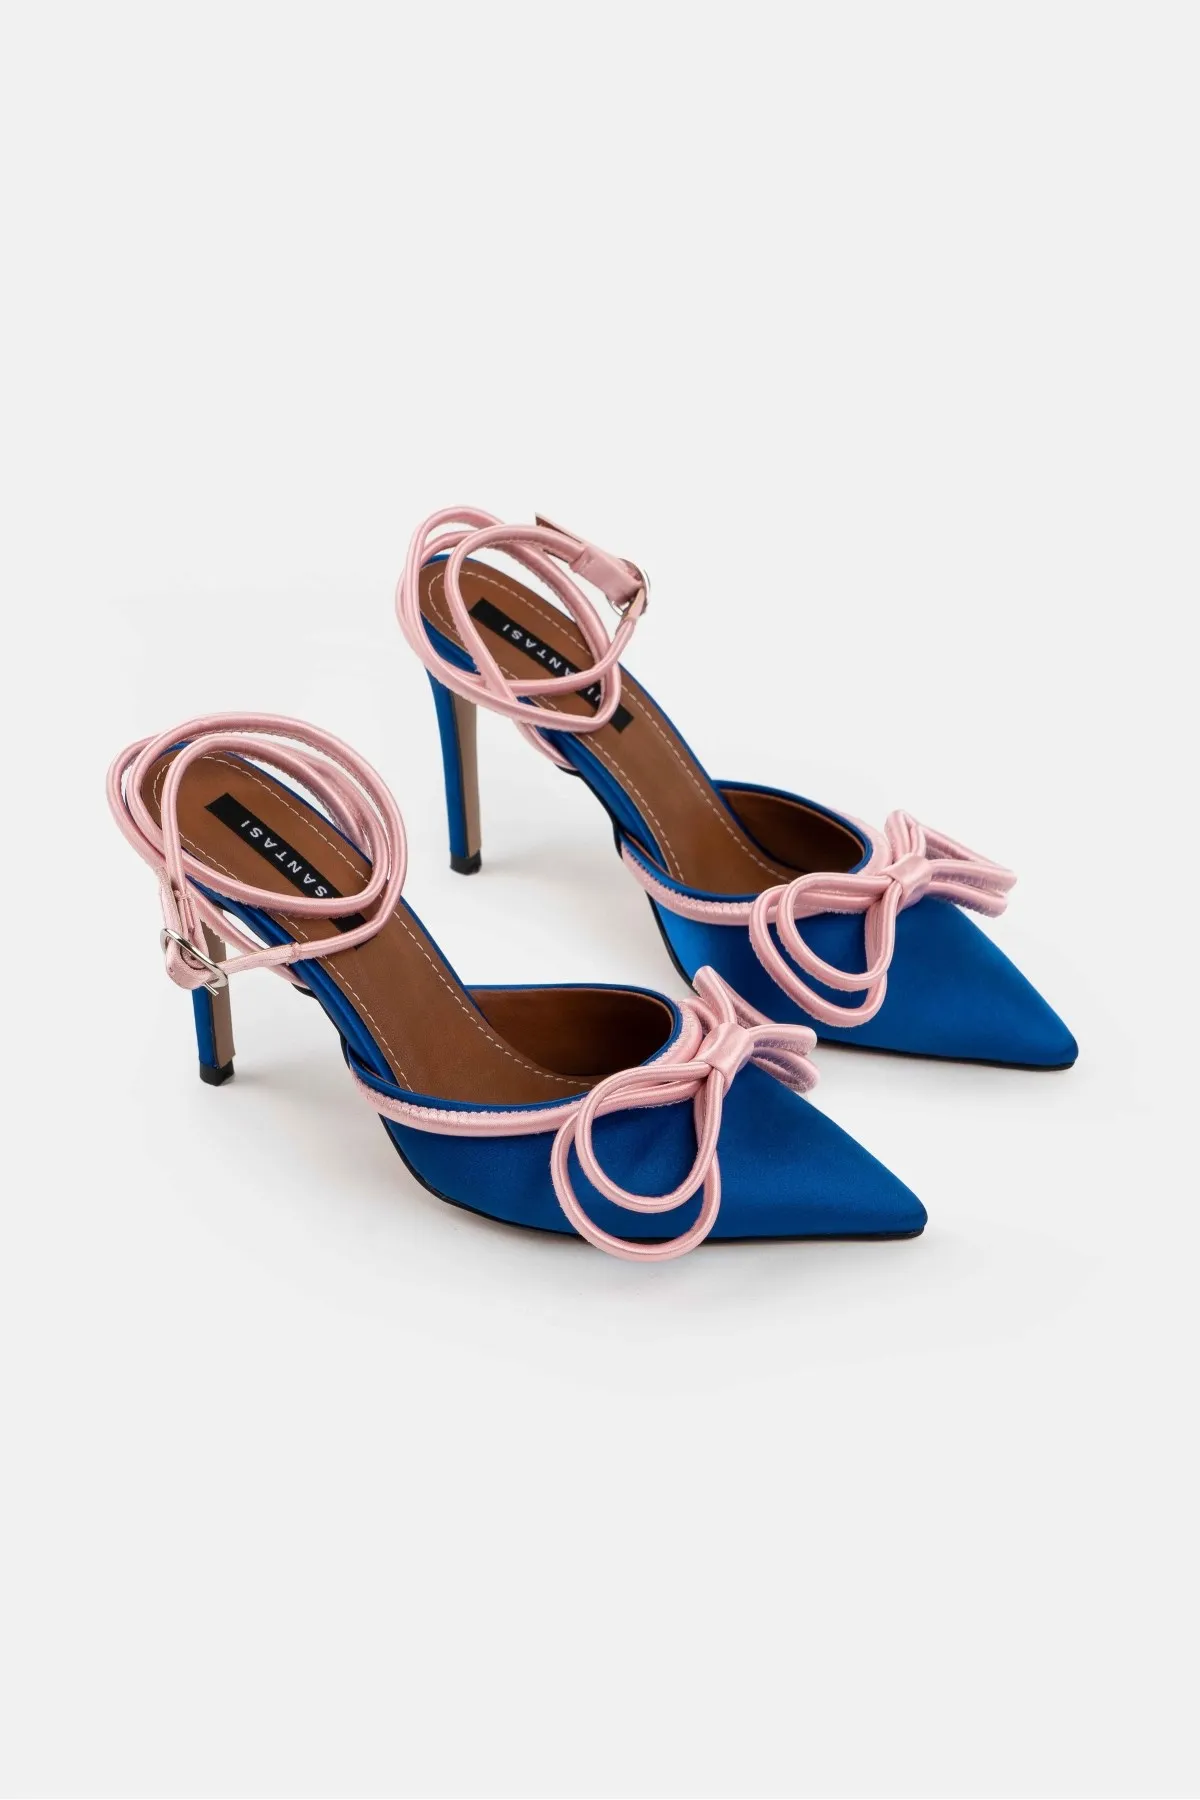 

Sax Blue Satin Powder Bow Detail Ankle Tied Women's Heeled Shoes Sexy Quality 2022 Summer Pointed Toe Sandals Strap Shinny Gift